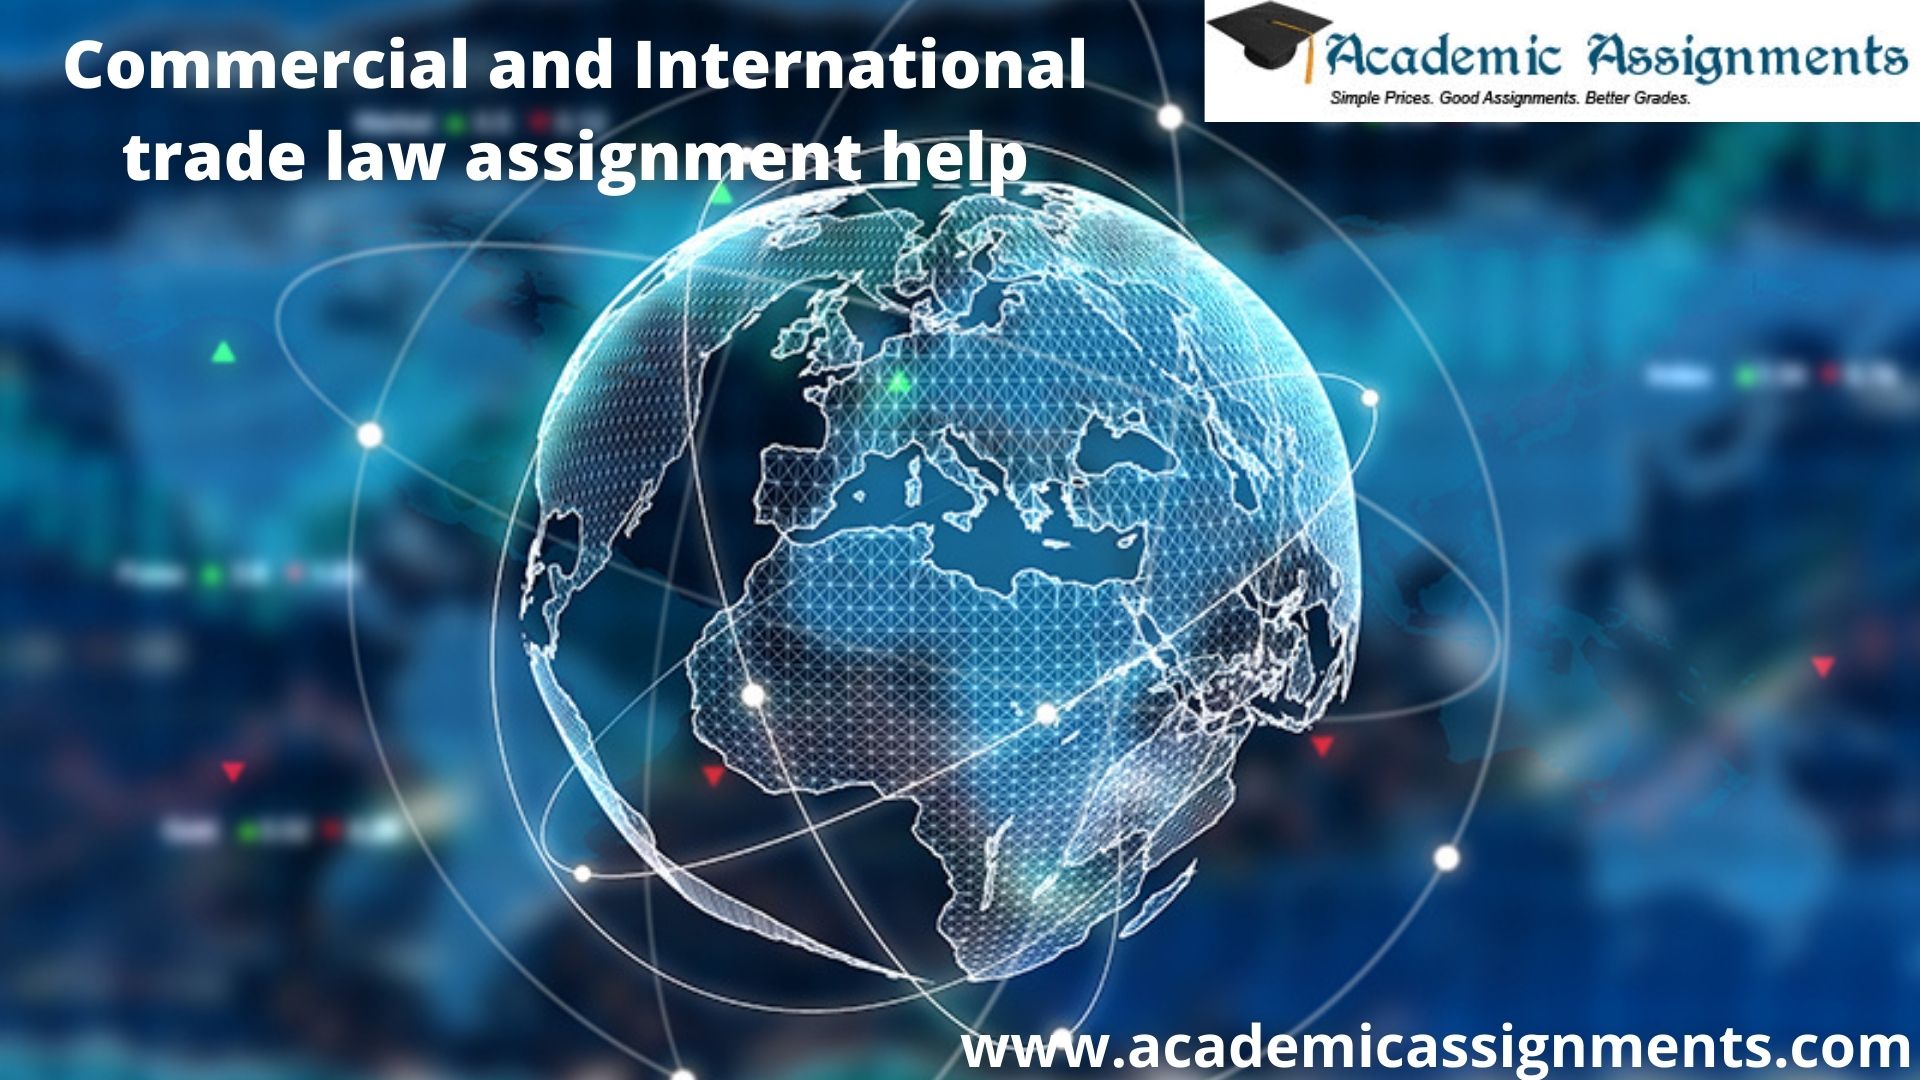 Commercial and International trade law assignment help